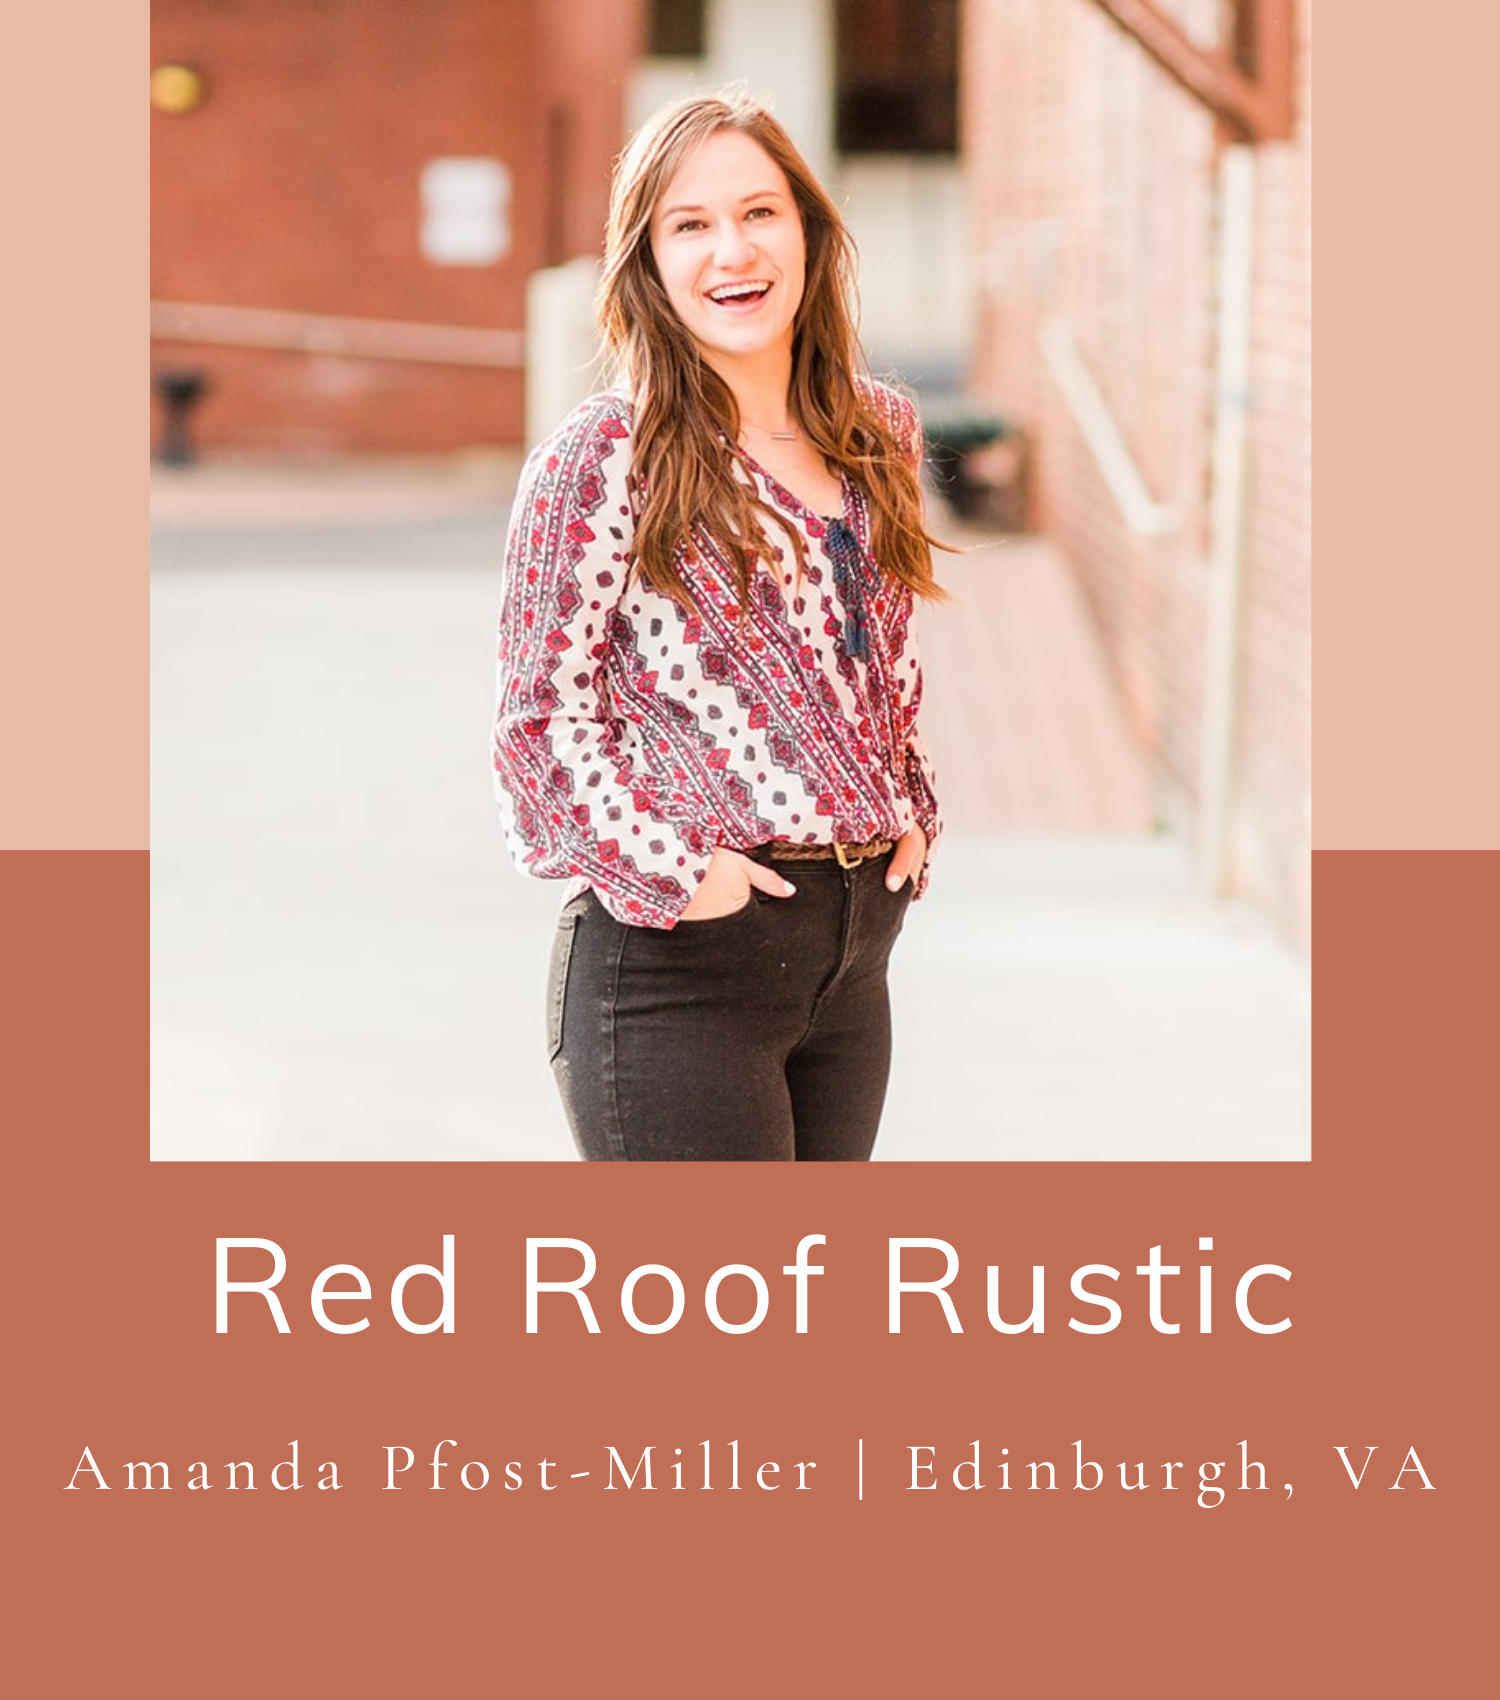 RED ROOF RUSTIC